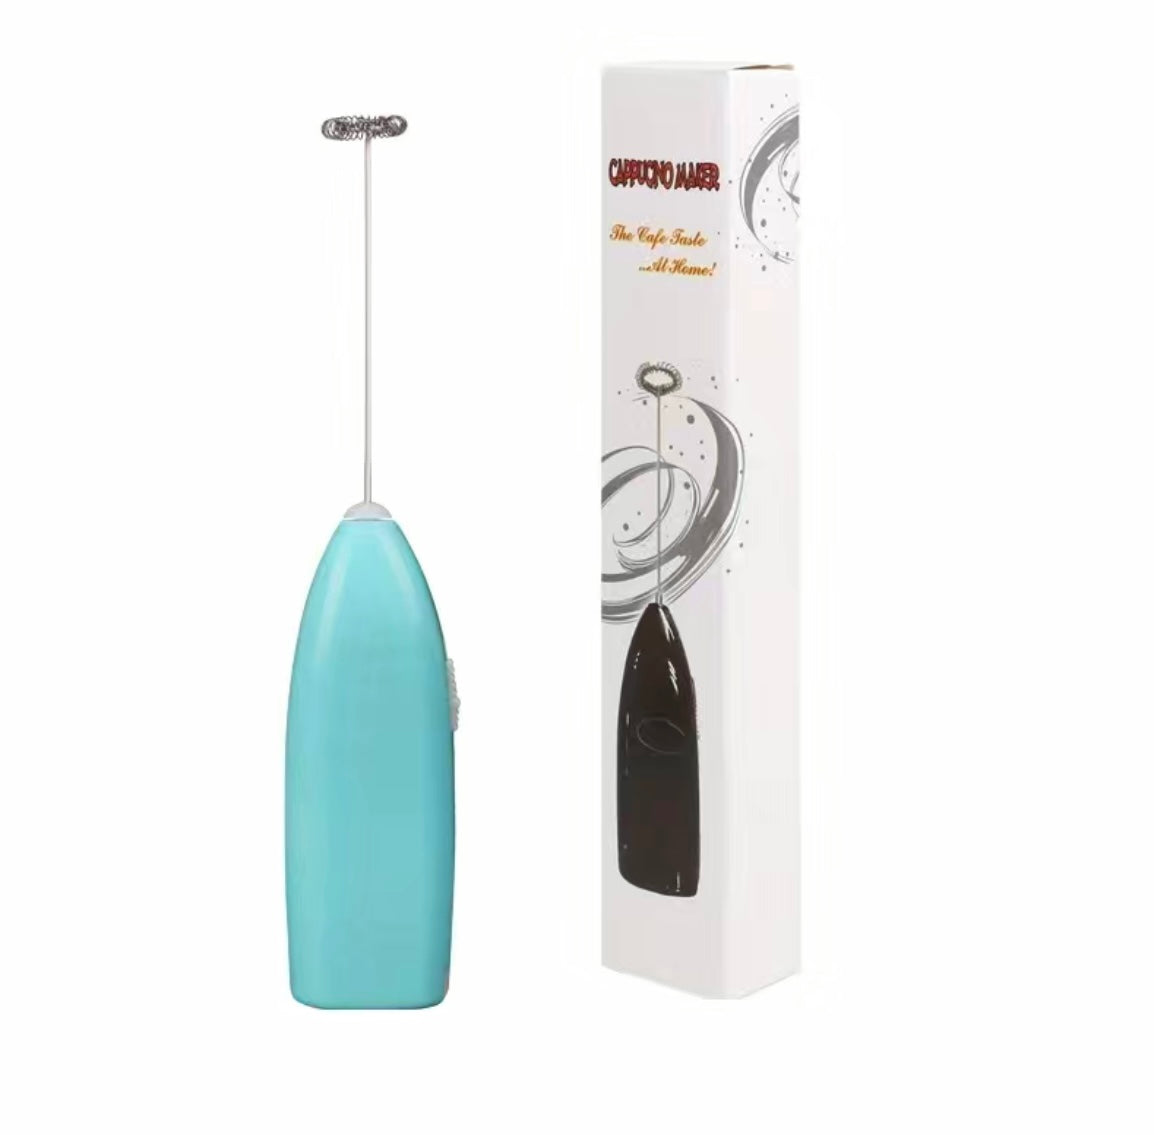 Electric Milk Frother Mixer Portable Handheld Foamer Chocolate Coffee Stirrer Household Blender Kitchen Supplies Blue